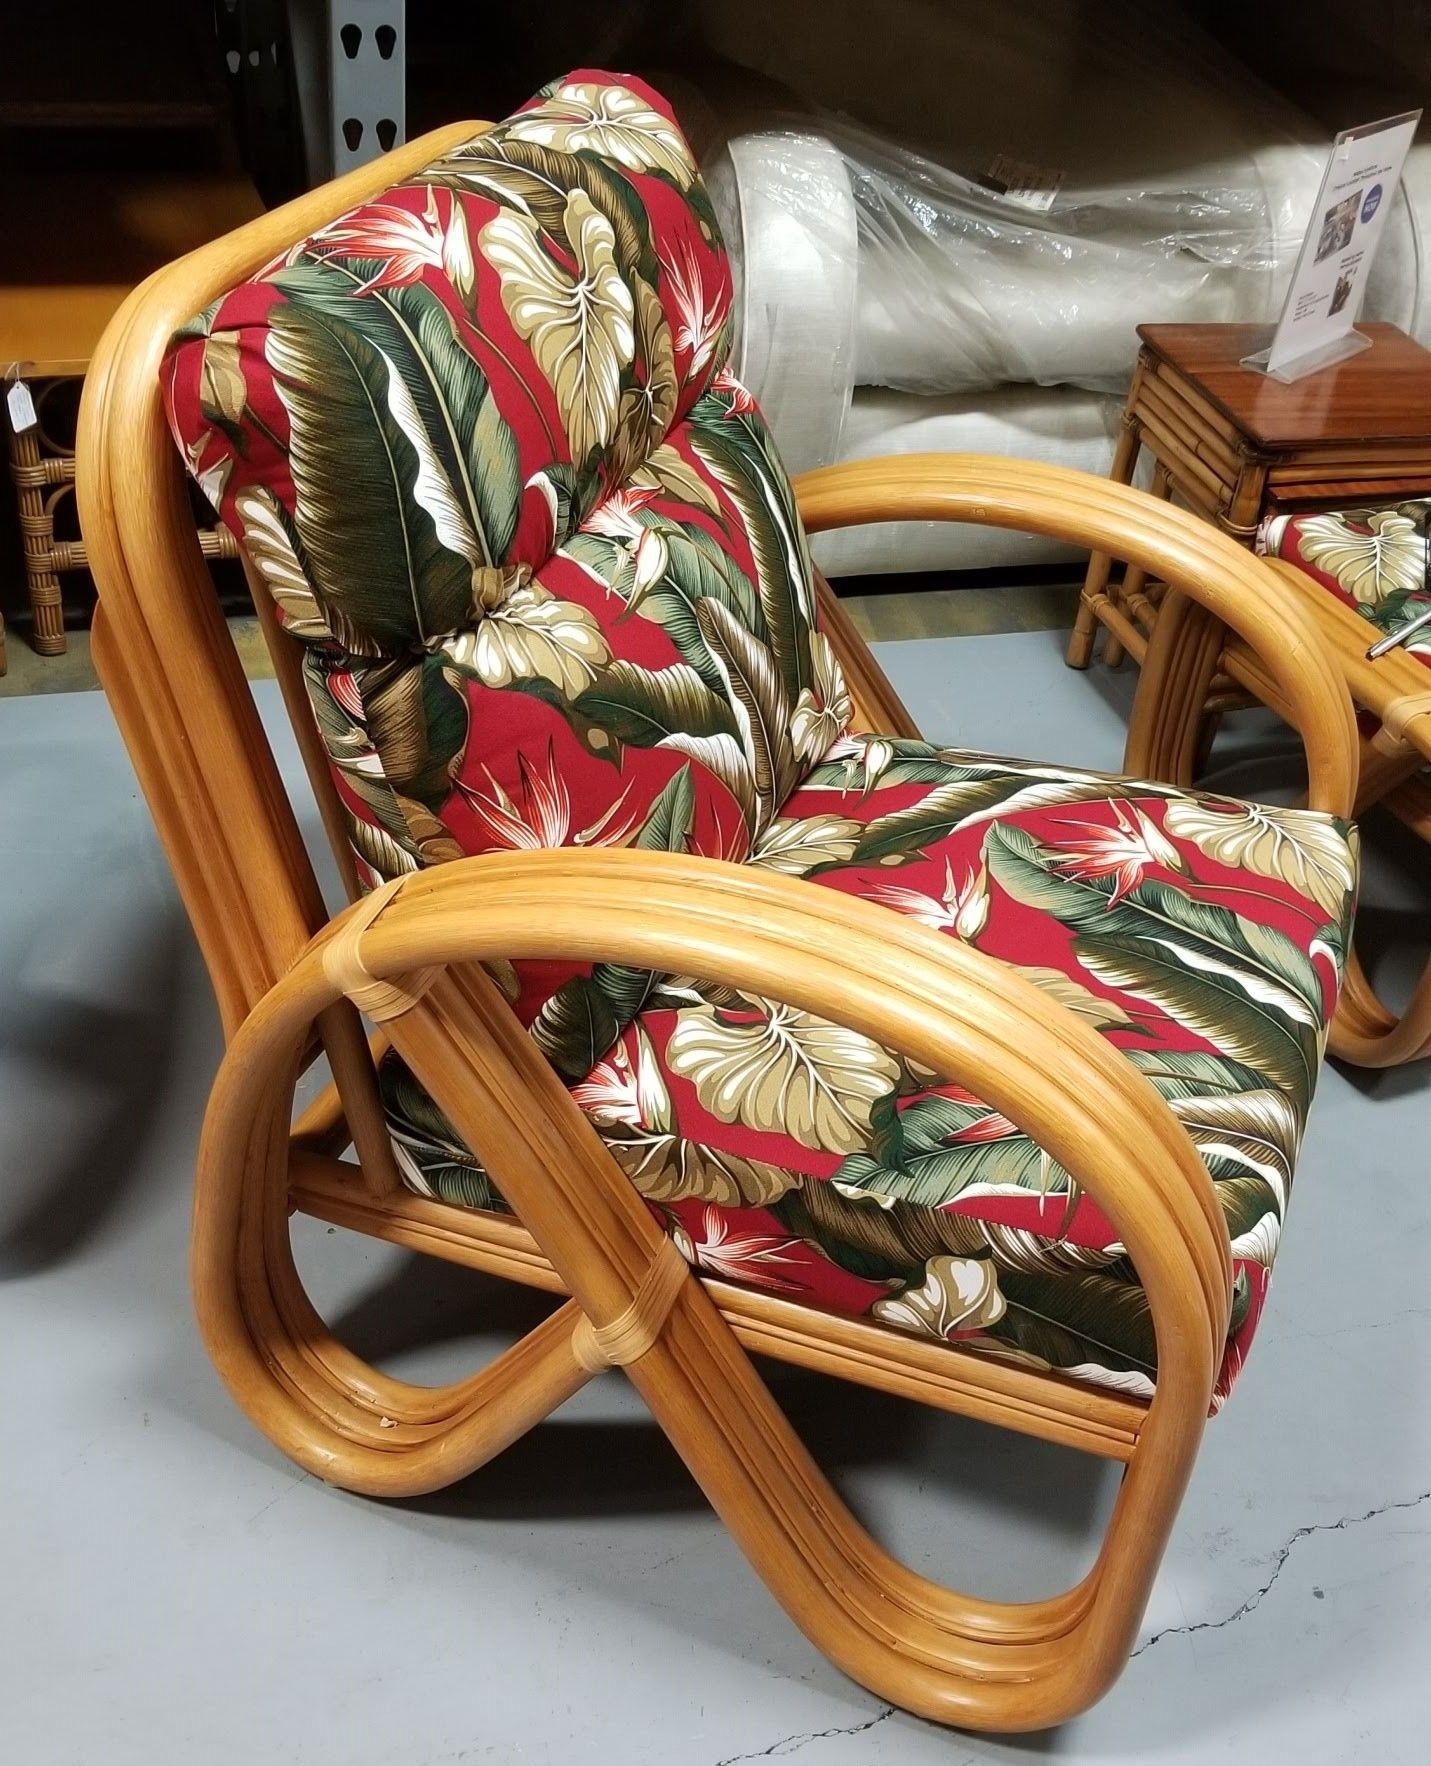 Restored rattan 3-Strand pretzel armchair with red and white birds of paradise tropical barckcloth cushions and a matching ottoman.

The 3-strand reverse pretzel rattan armchair is a unique and visually captivating piece of furniture adding a touch